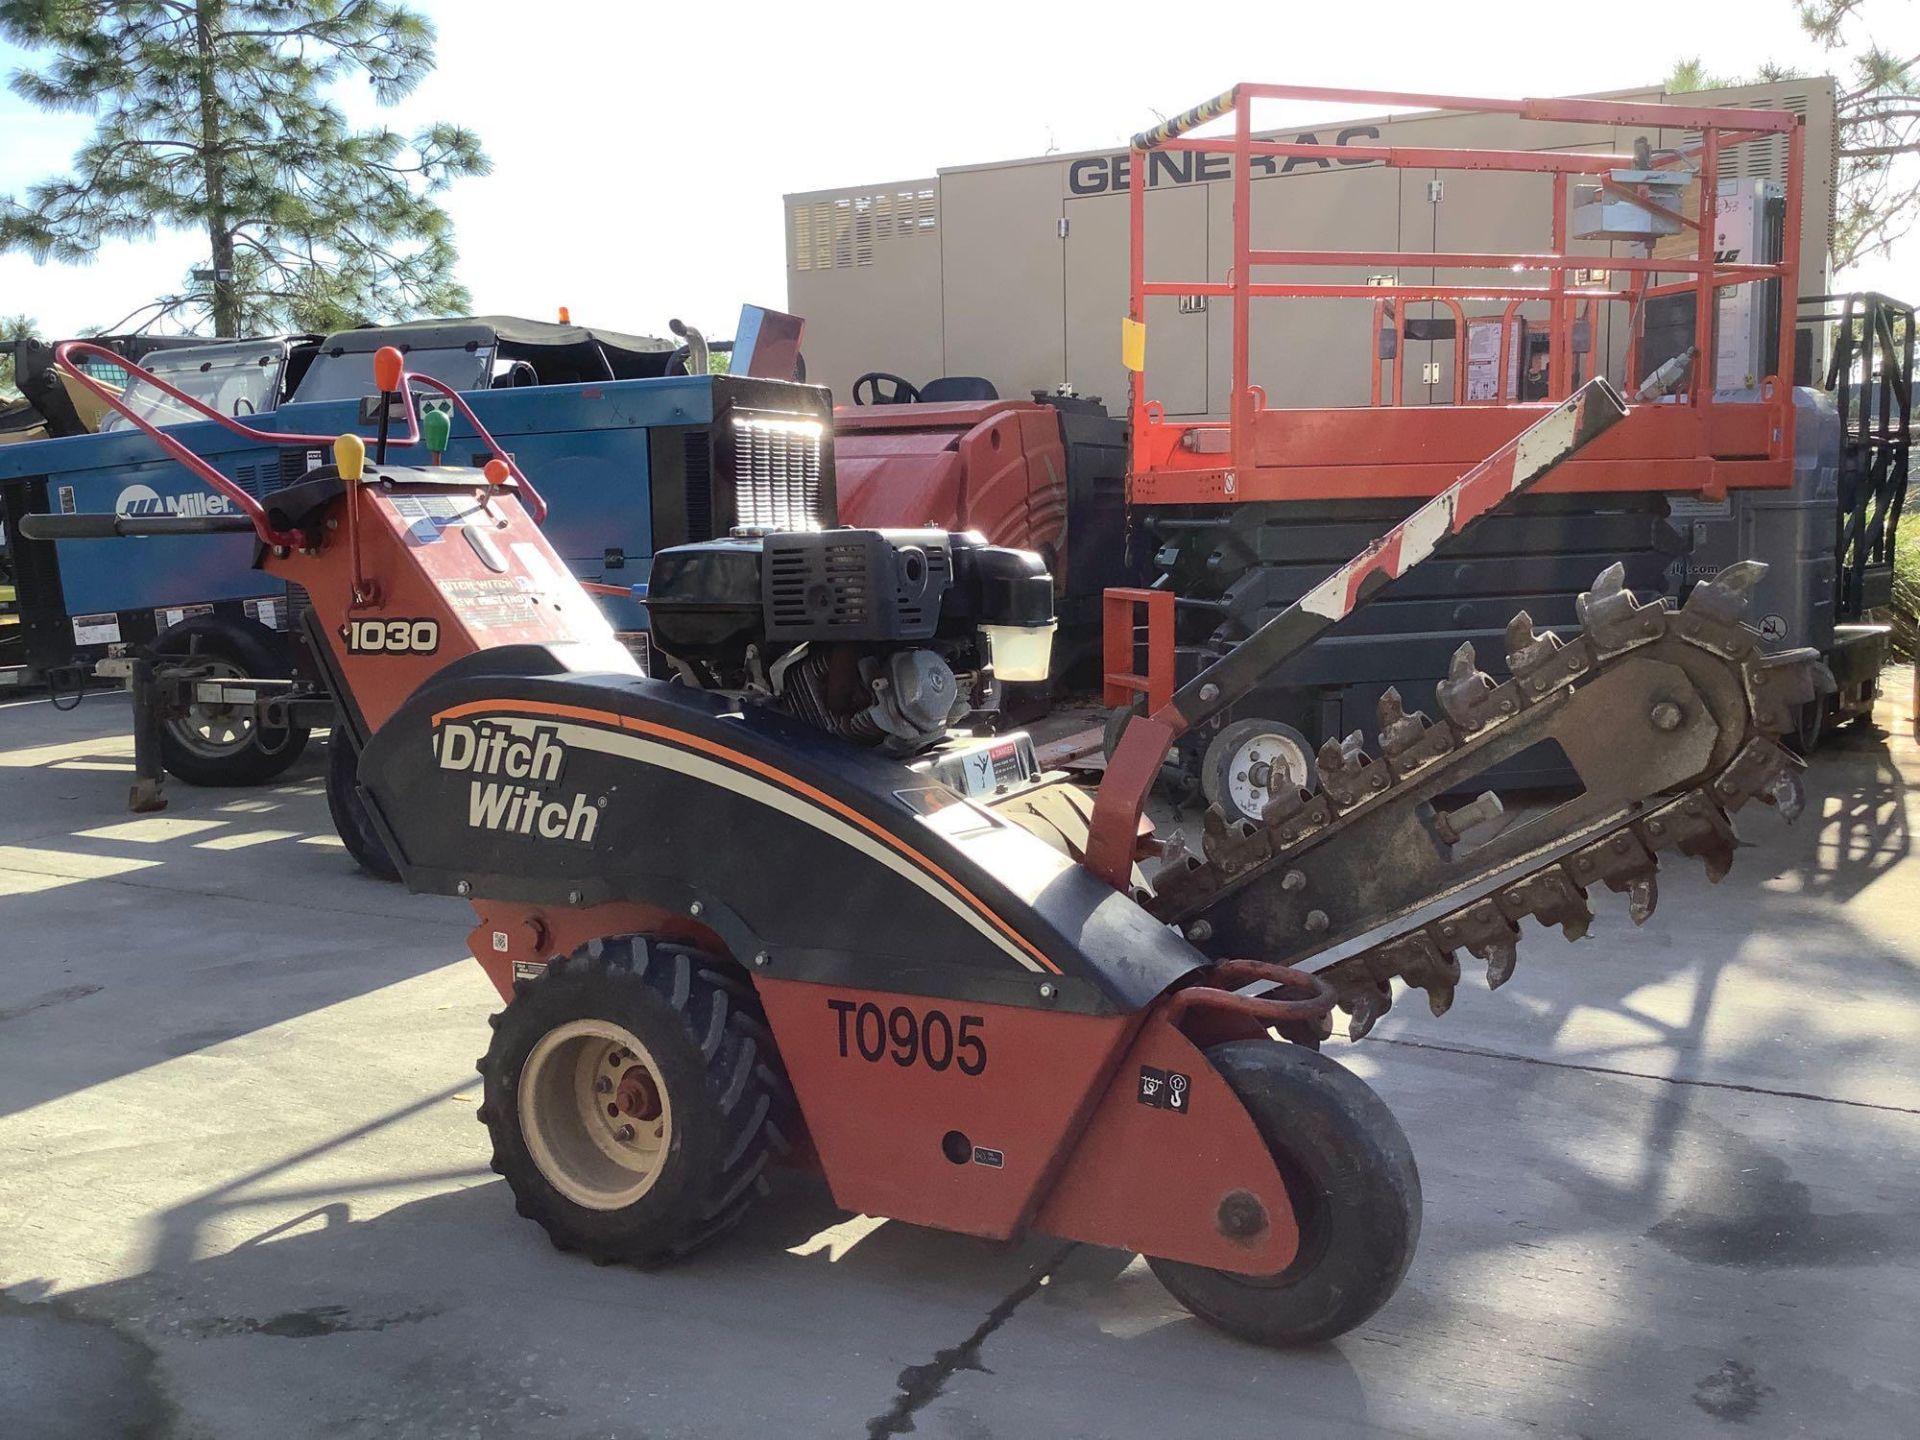 DITCH WITCH WALK BEHIND TRENCHER MODEL 1030, GAS POWERED, RUNS & OPERATES - Image 6 of 11